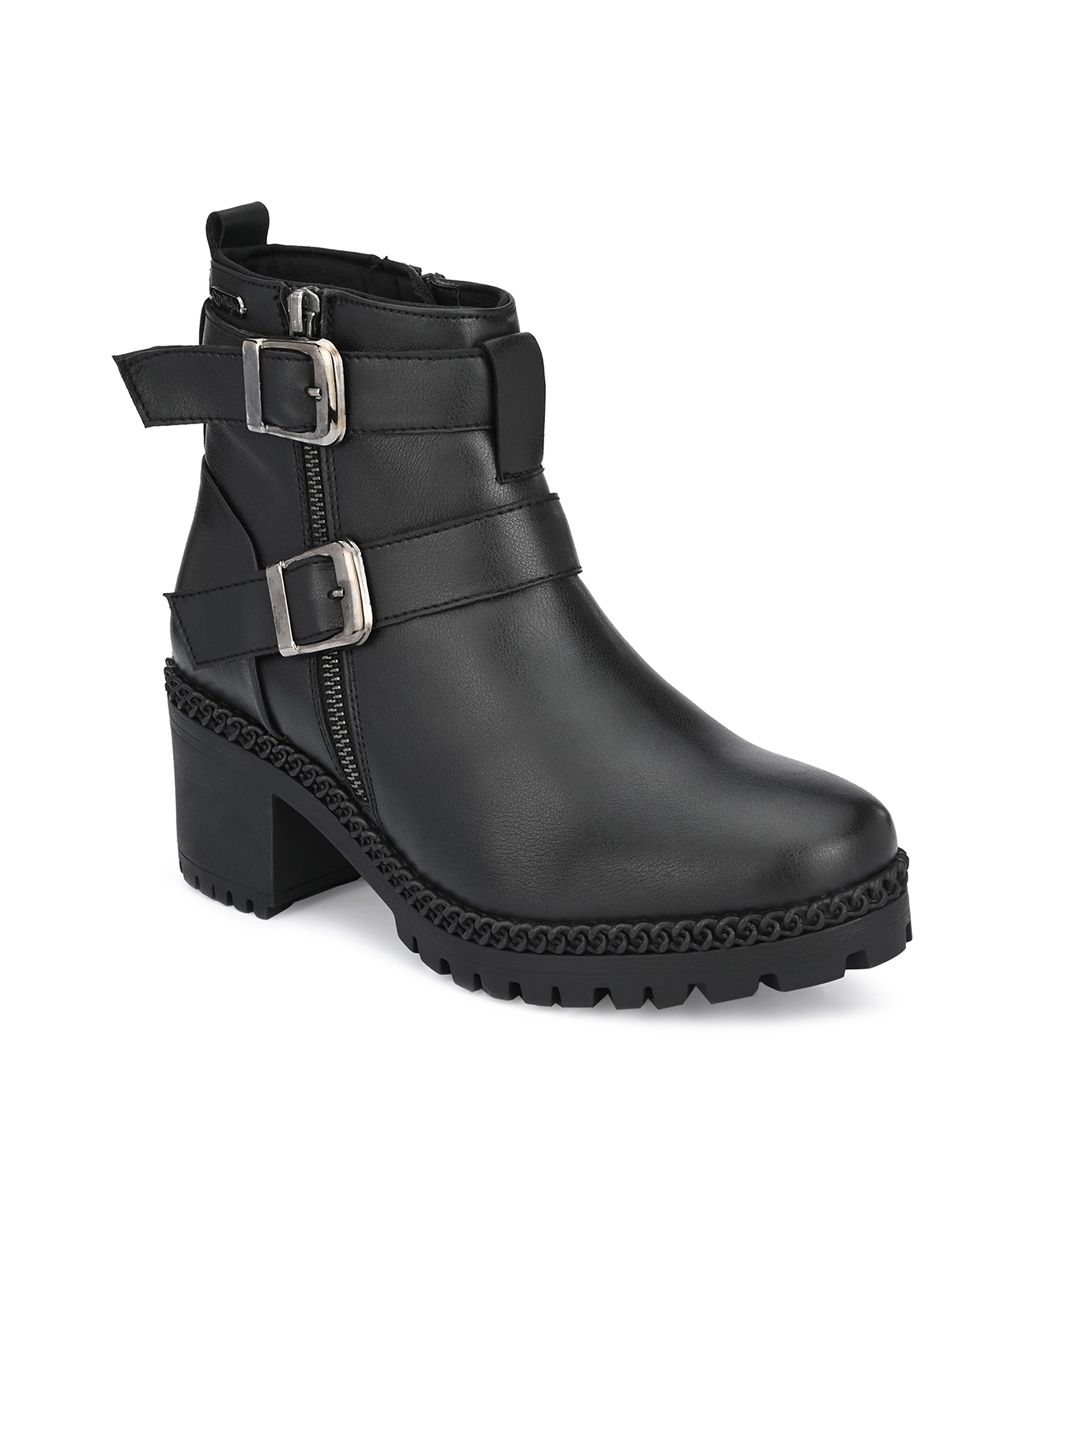 Delize Black Block Heeled Boots with Buckles Price in India